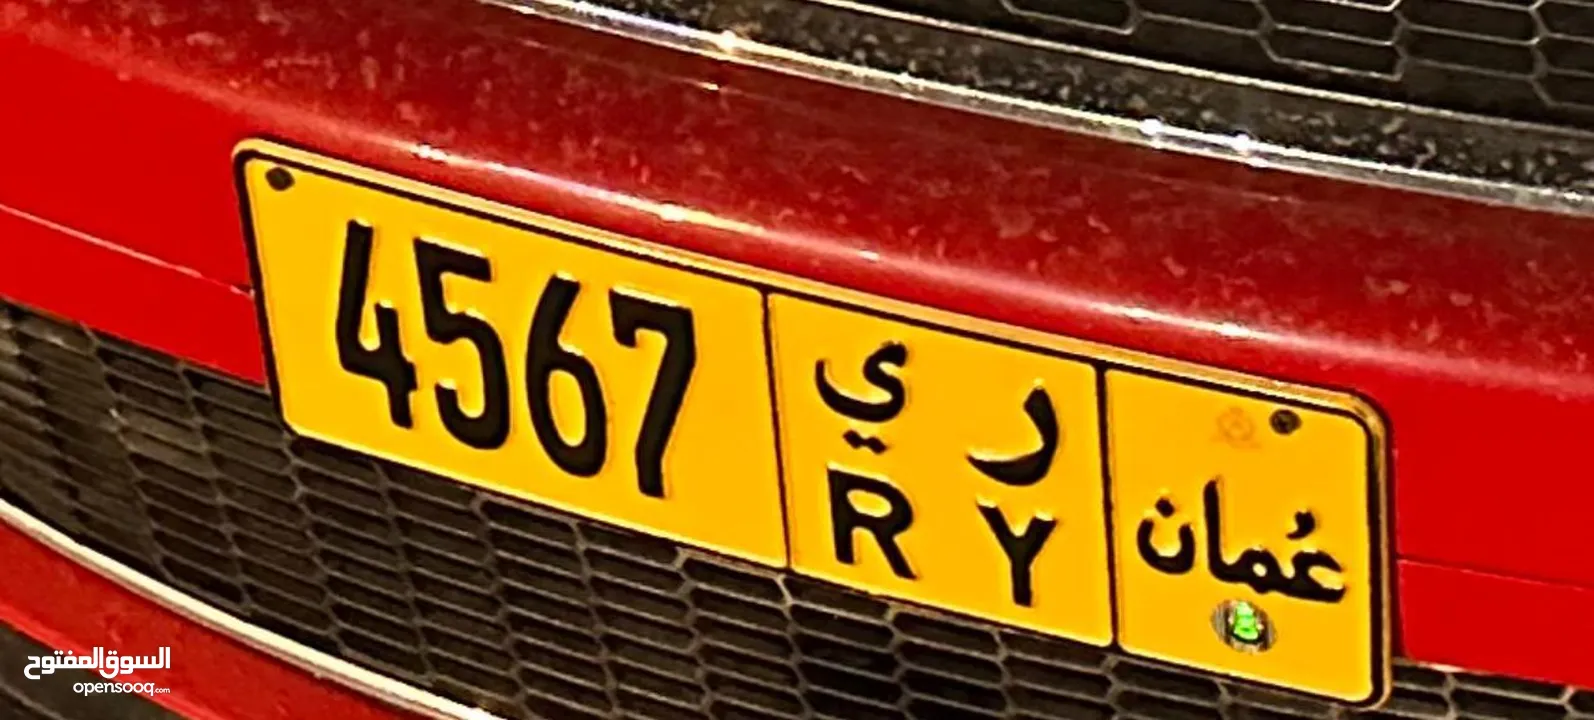 FANCY NUMBER PLATE FOR SALE 4567